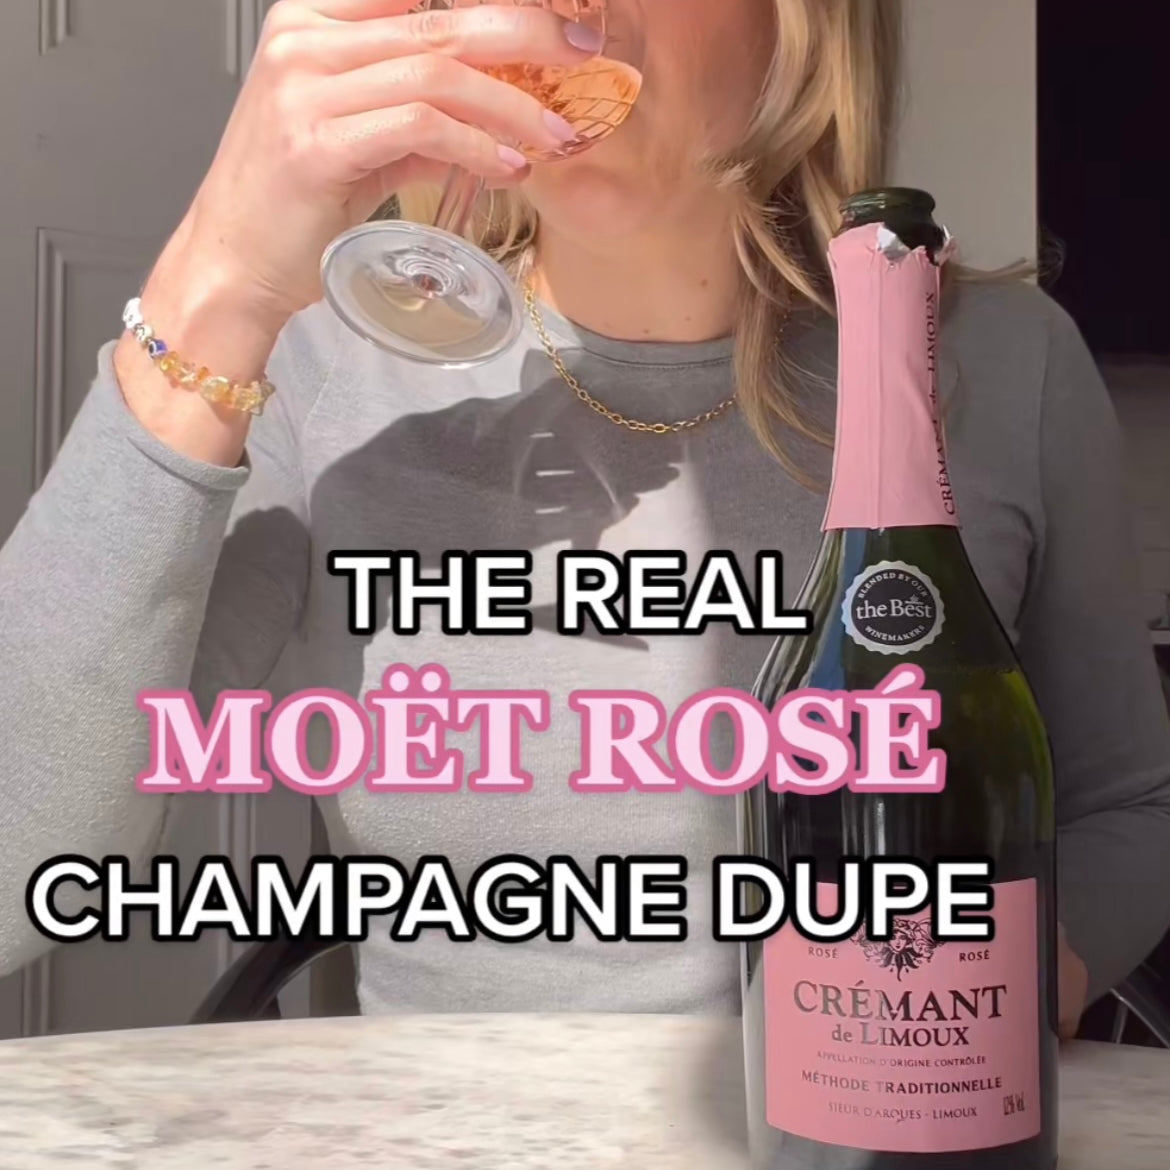 The real Moët Rosé Champagne dupe